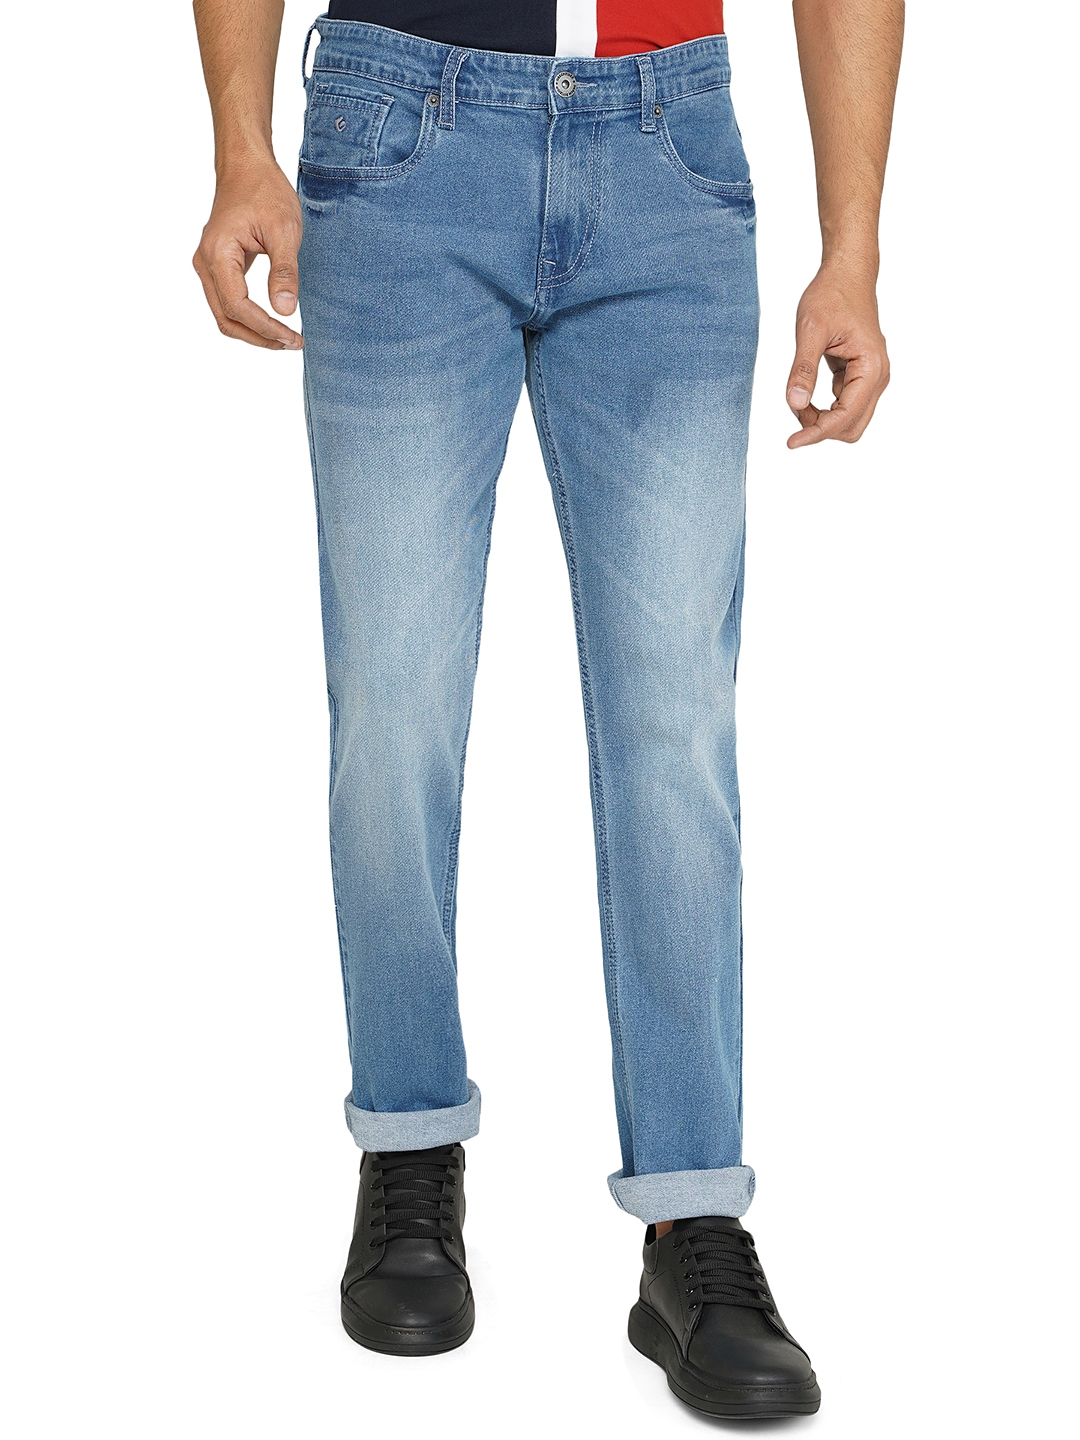 Greenfibre | Blue Washed Straight Fit Jeans | Greenfibre 0